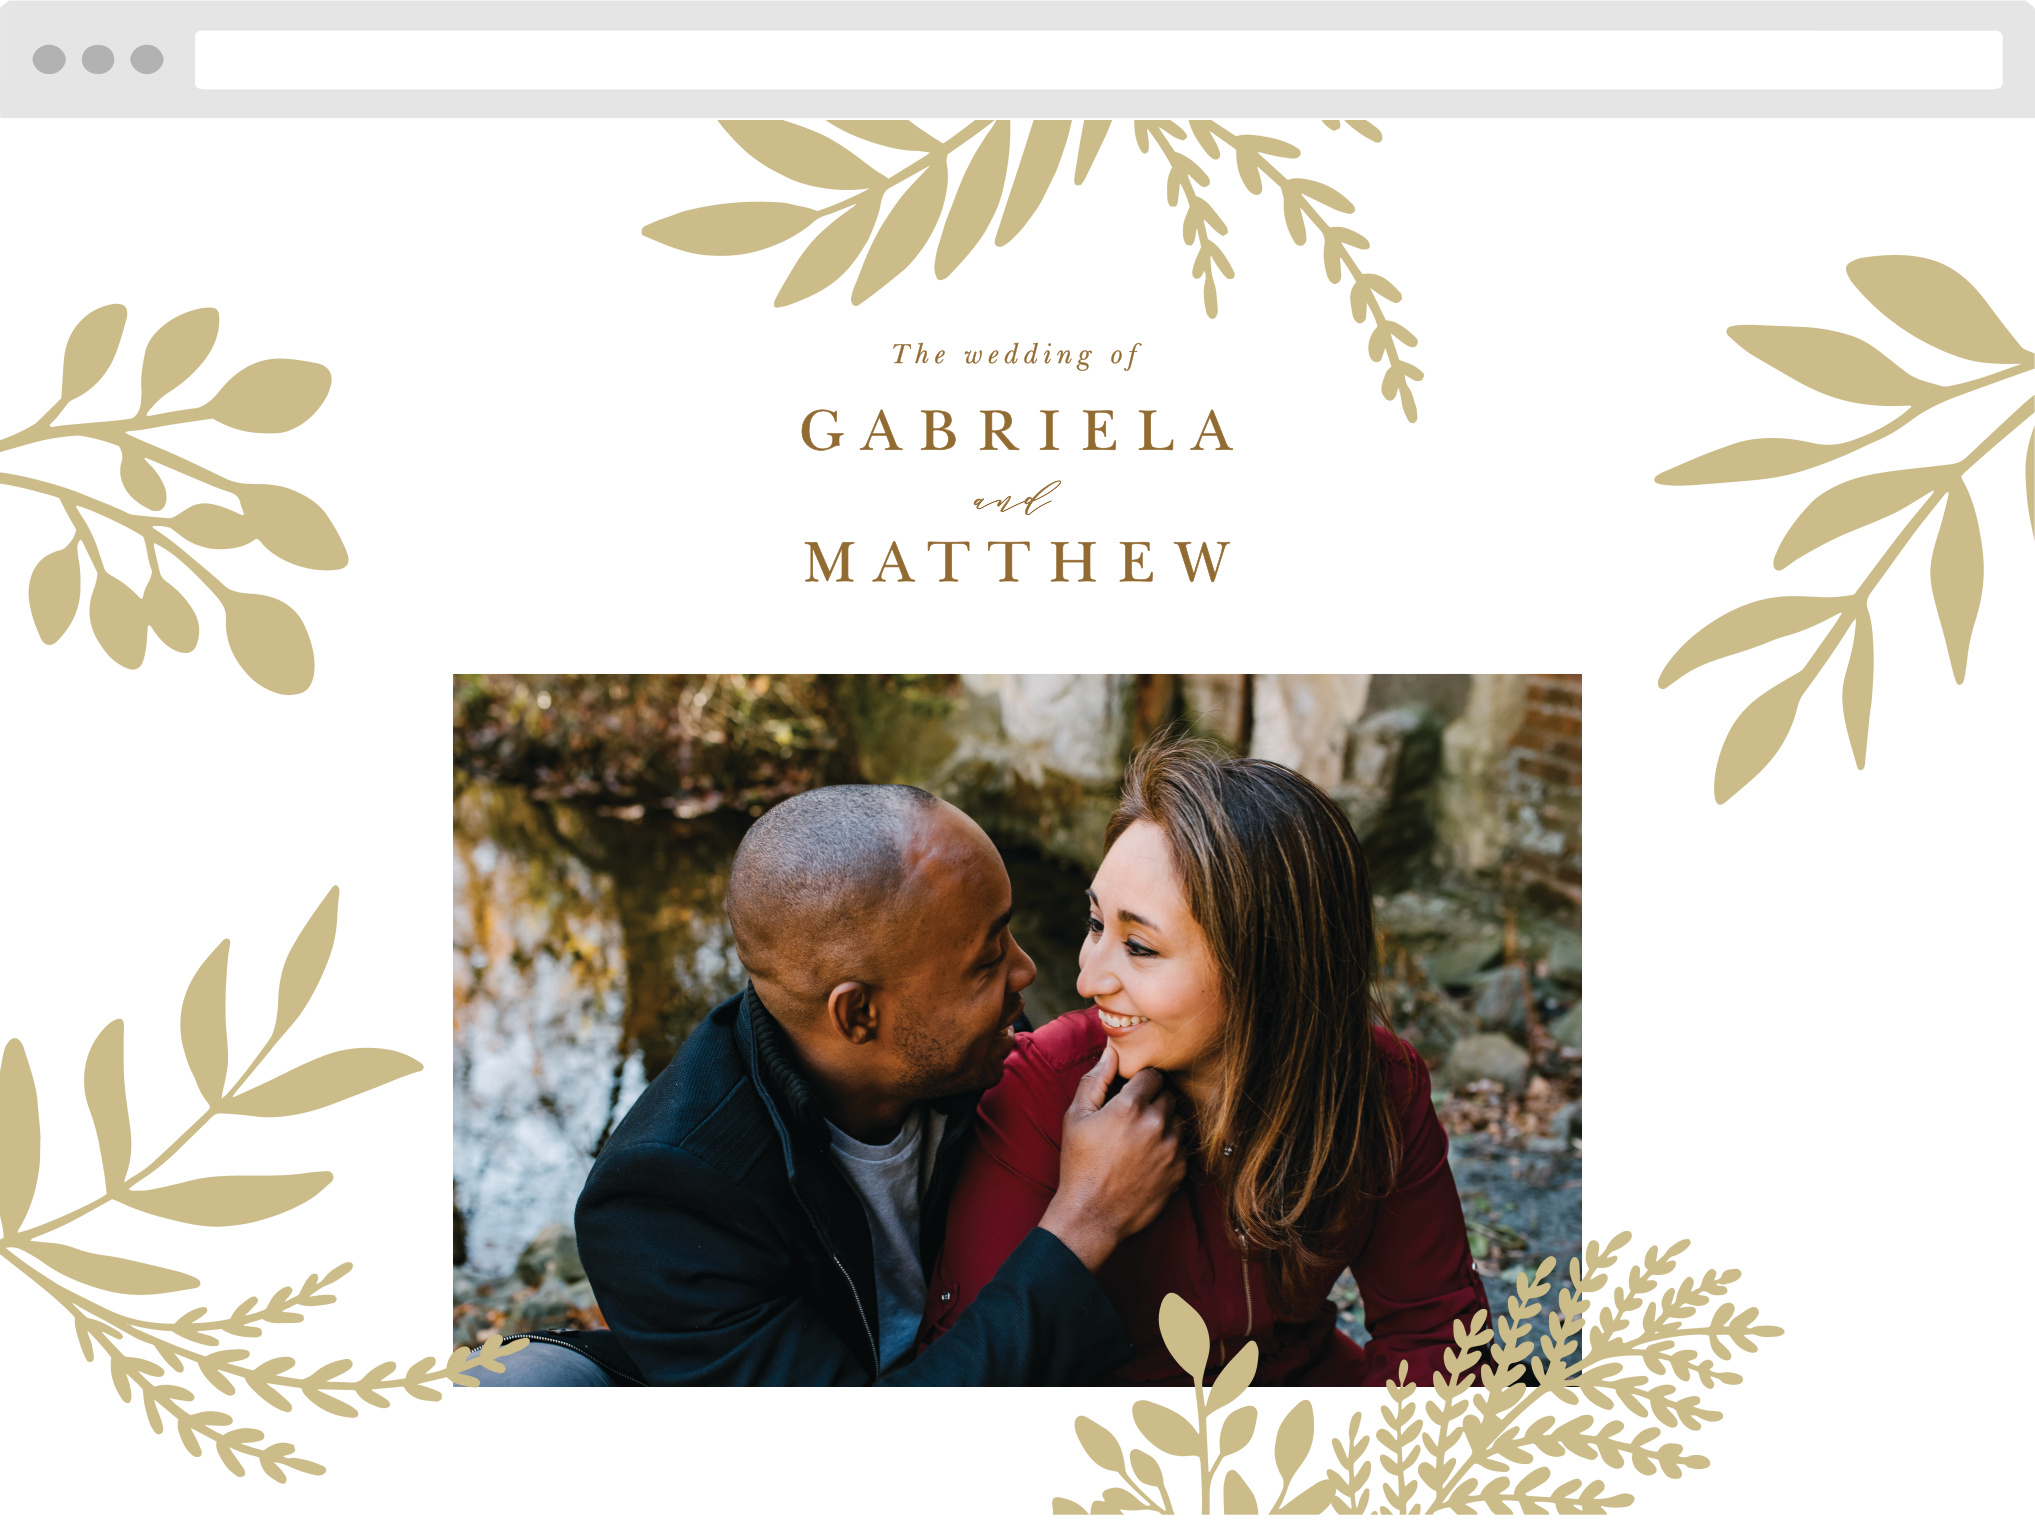 100% Free Wedding Websites | Match Your Colors & Style! - Basic Invite